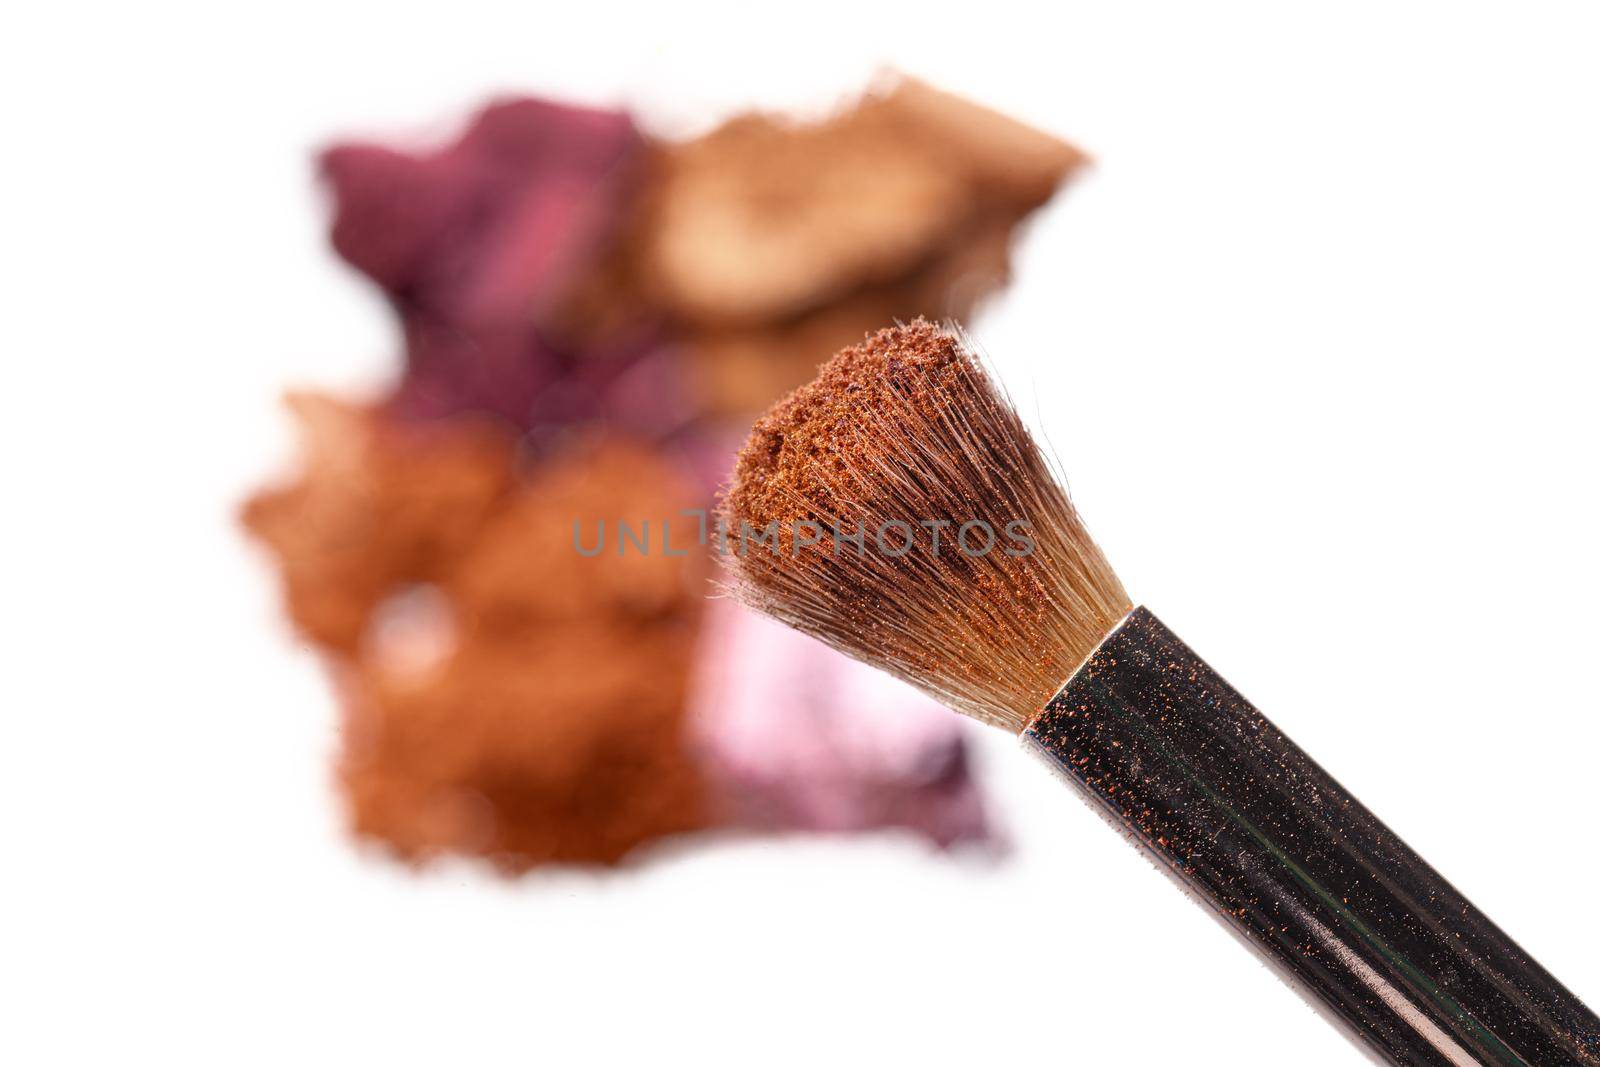 Crushed eyeshadow samples of bright colors isolated on white background